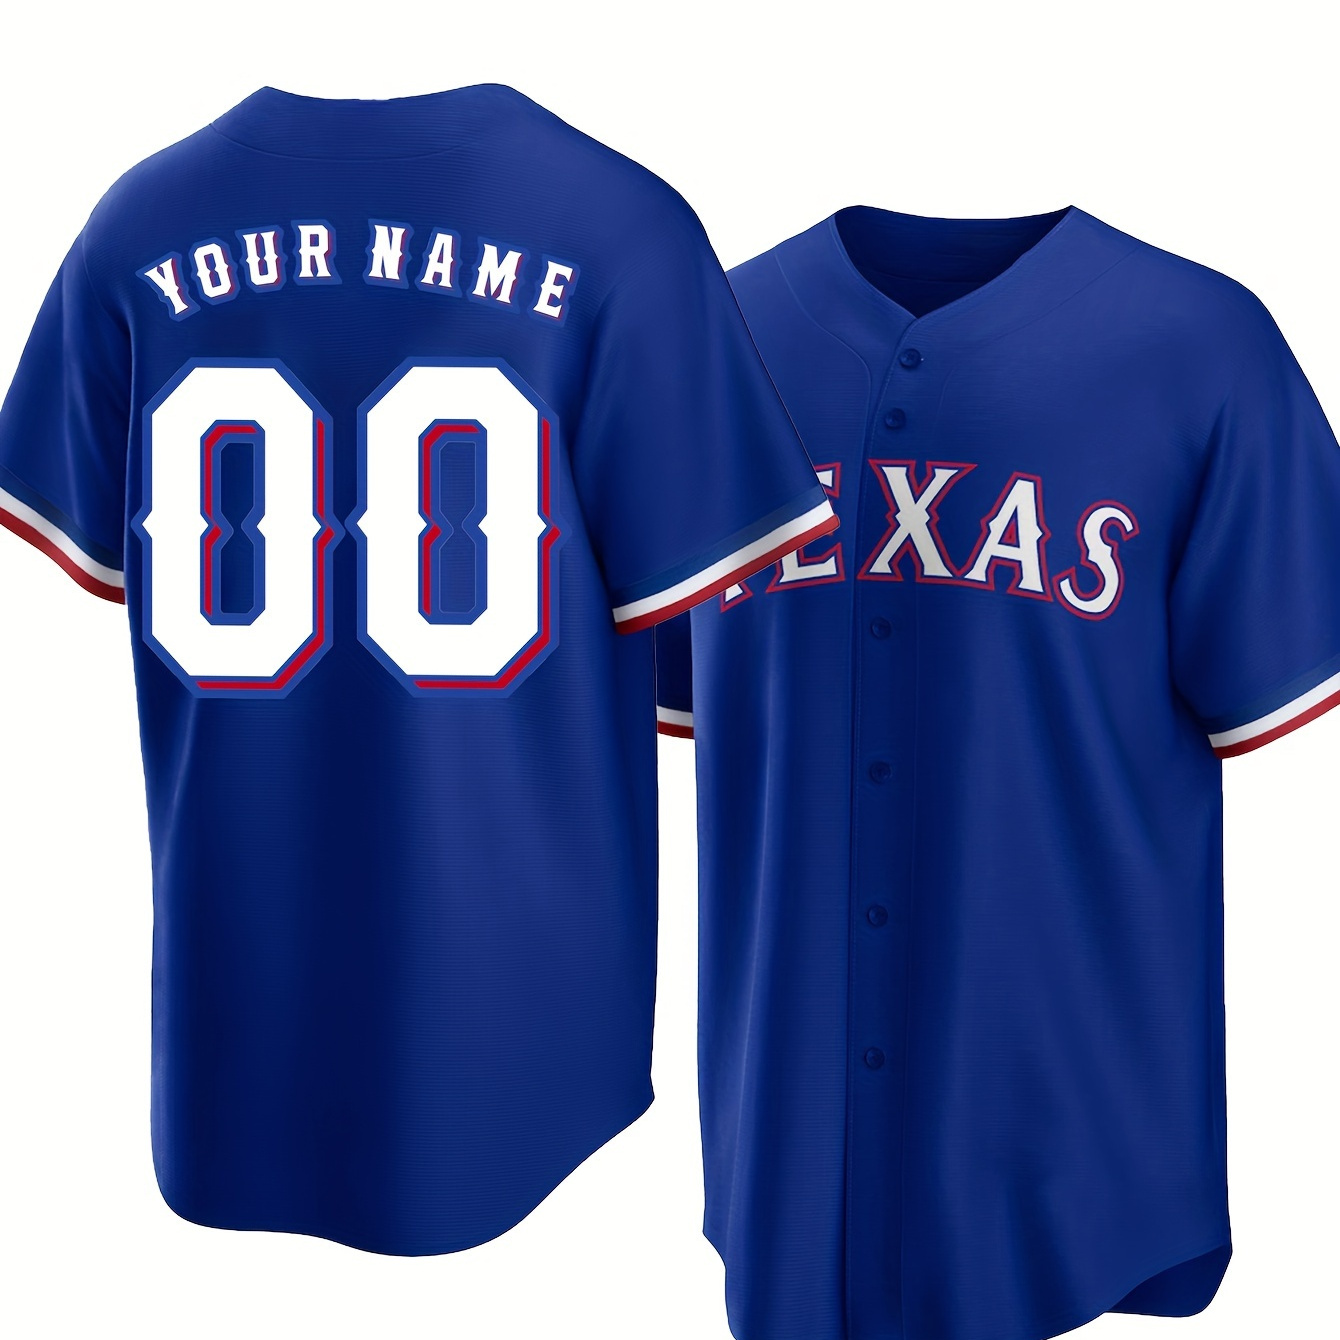 

Customized Name And Number, Texas Embroidery Men's V-neck Button Up Baseball Jersey, Summer Tops For Sports And Outdoors Wear